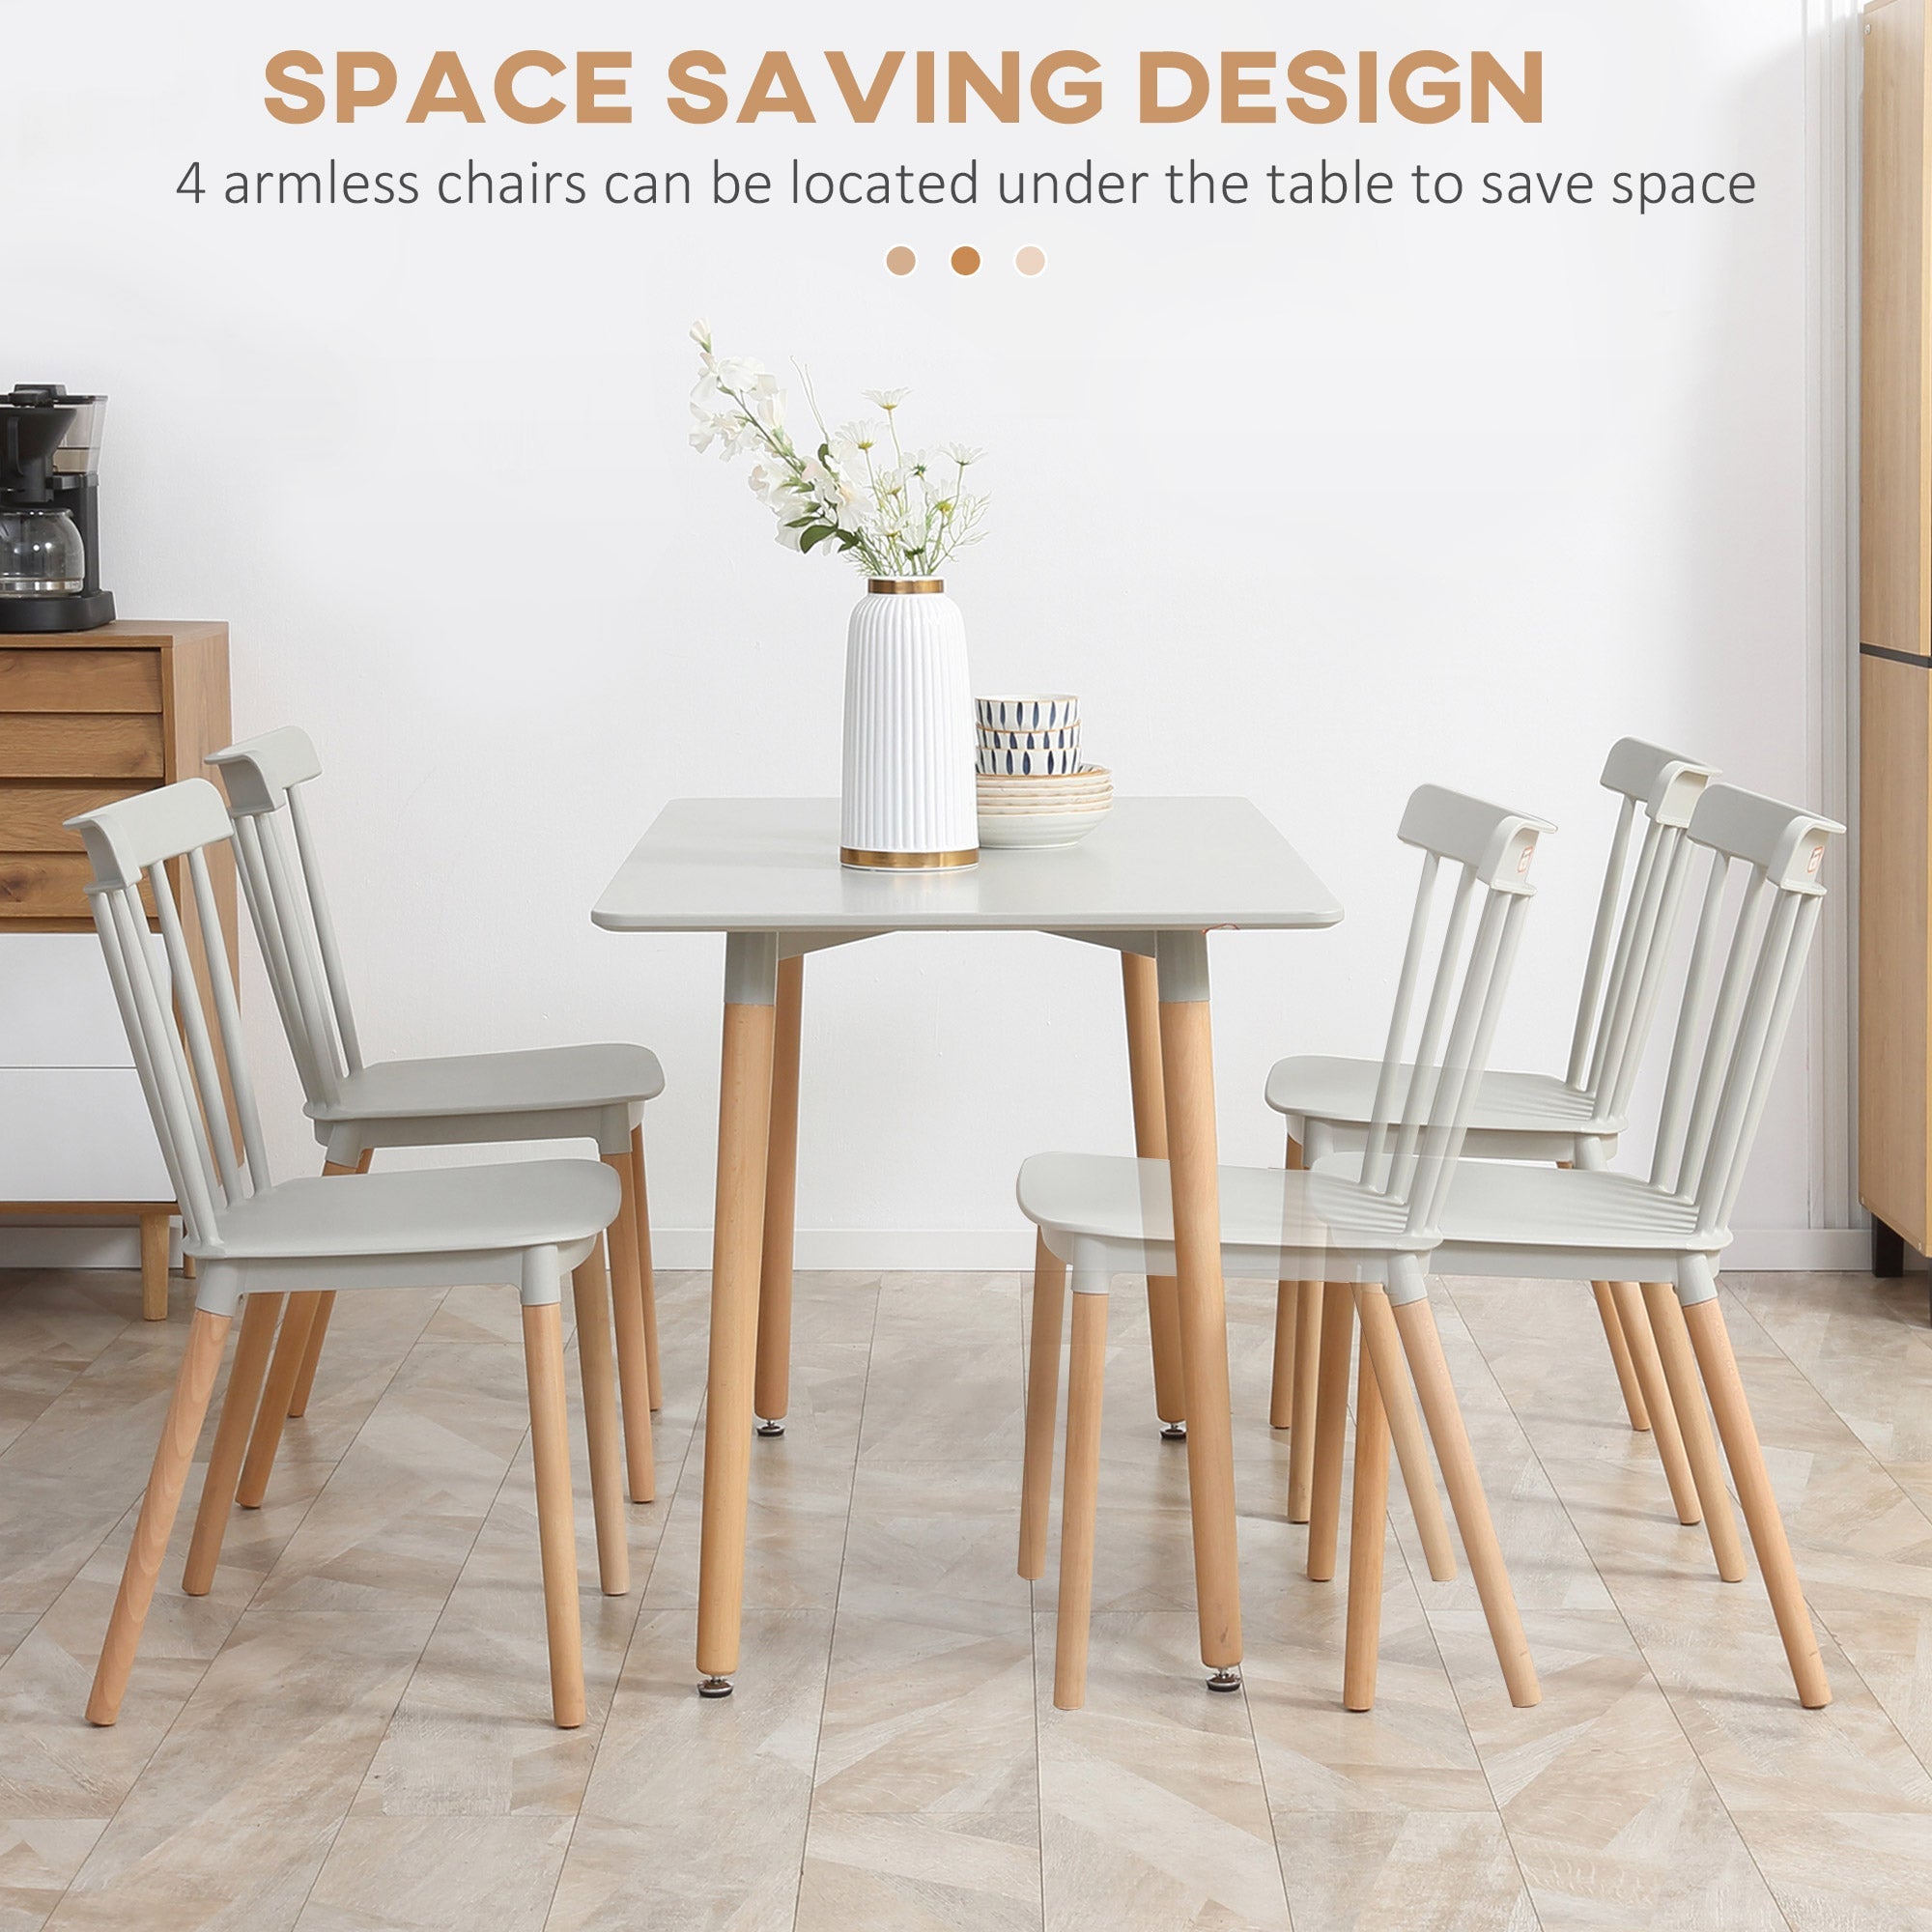 5 Piece Dining Table Set with Beech Wood Legs, Space Saving Table and 4 Chairs for Small Kitchens, Grey-3